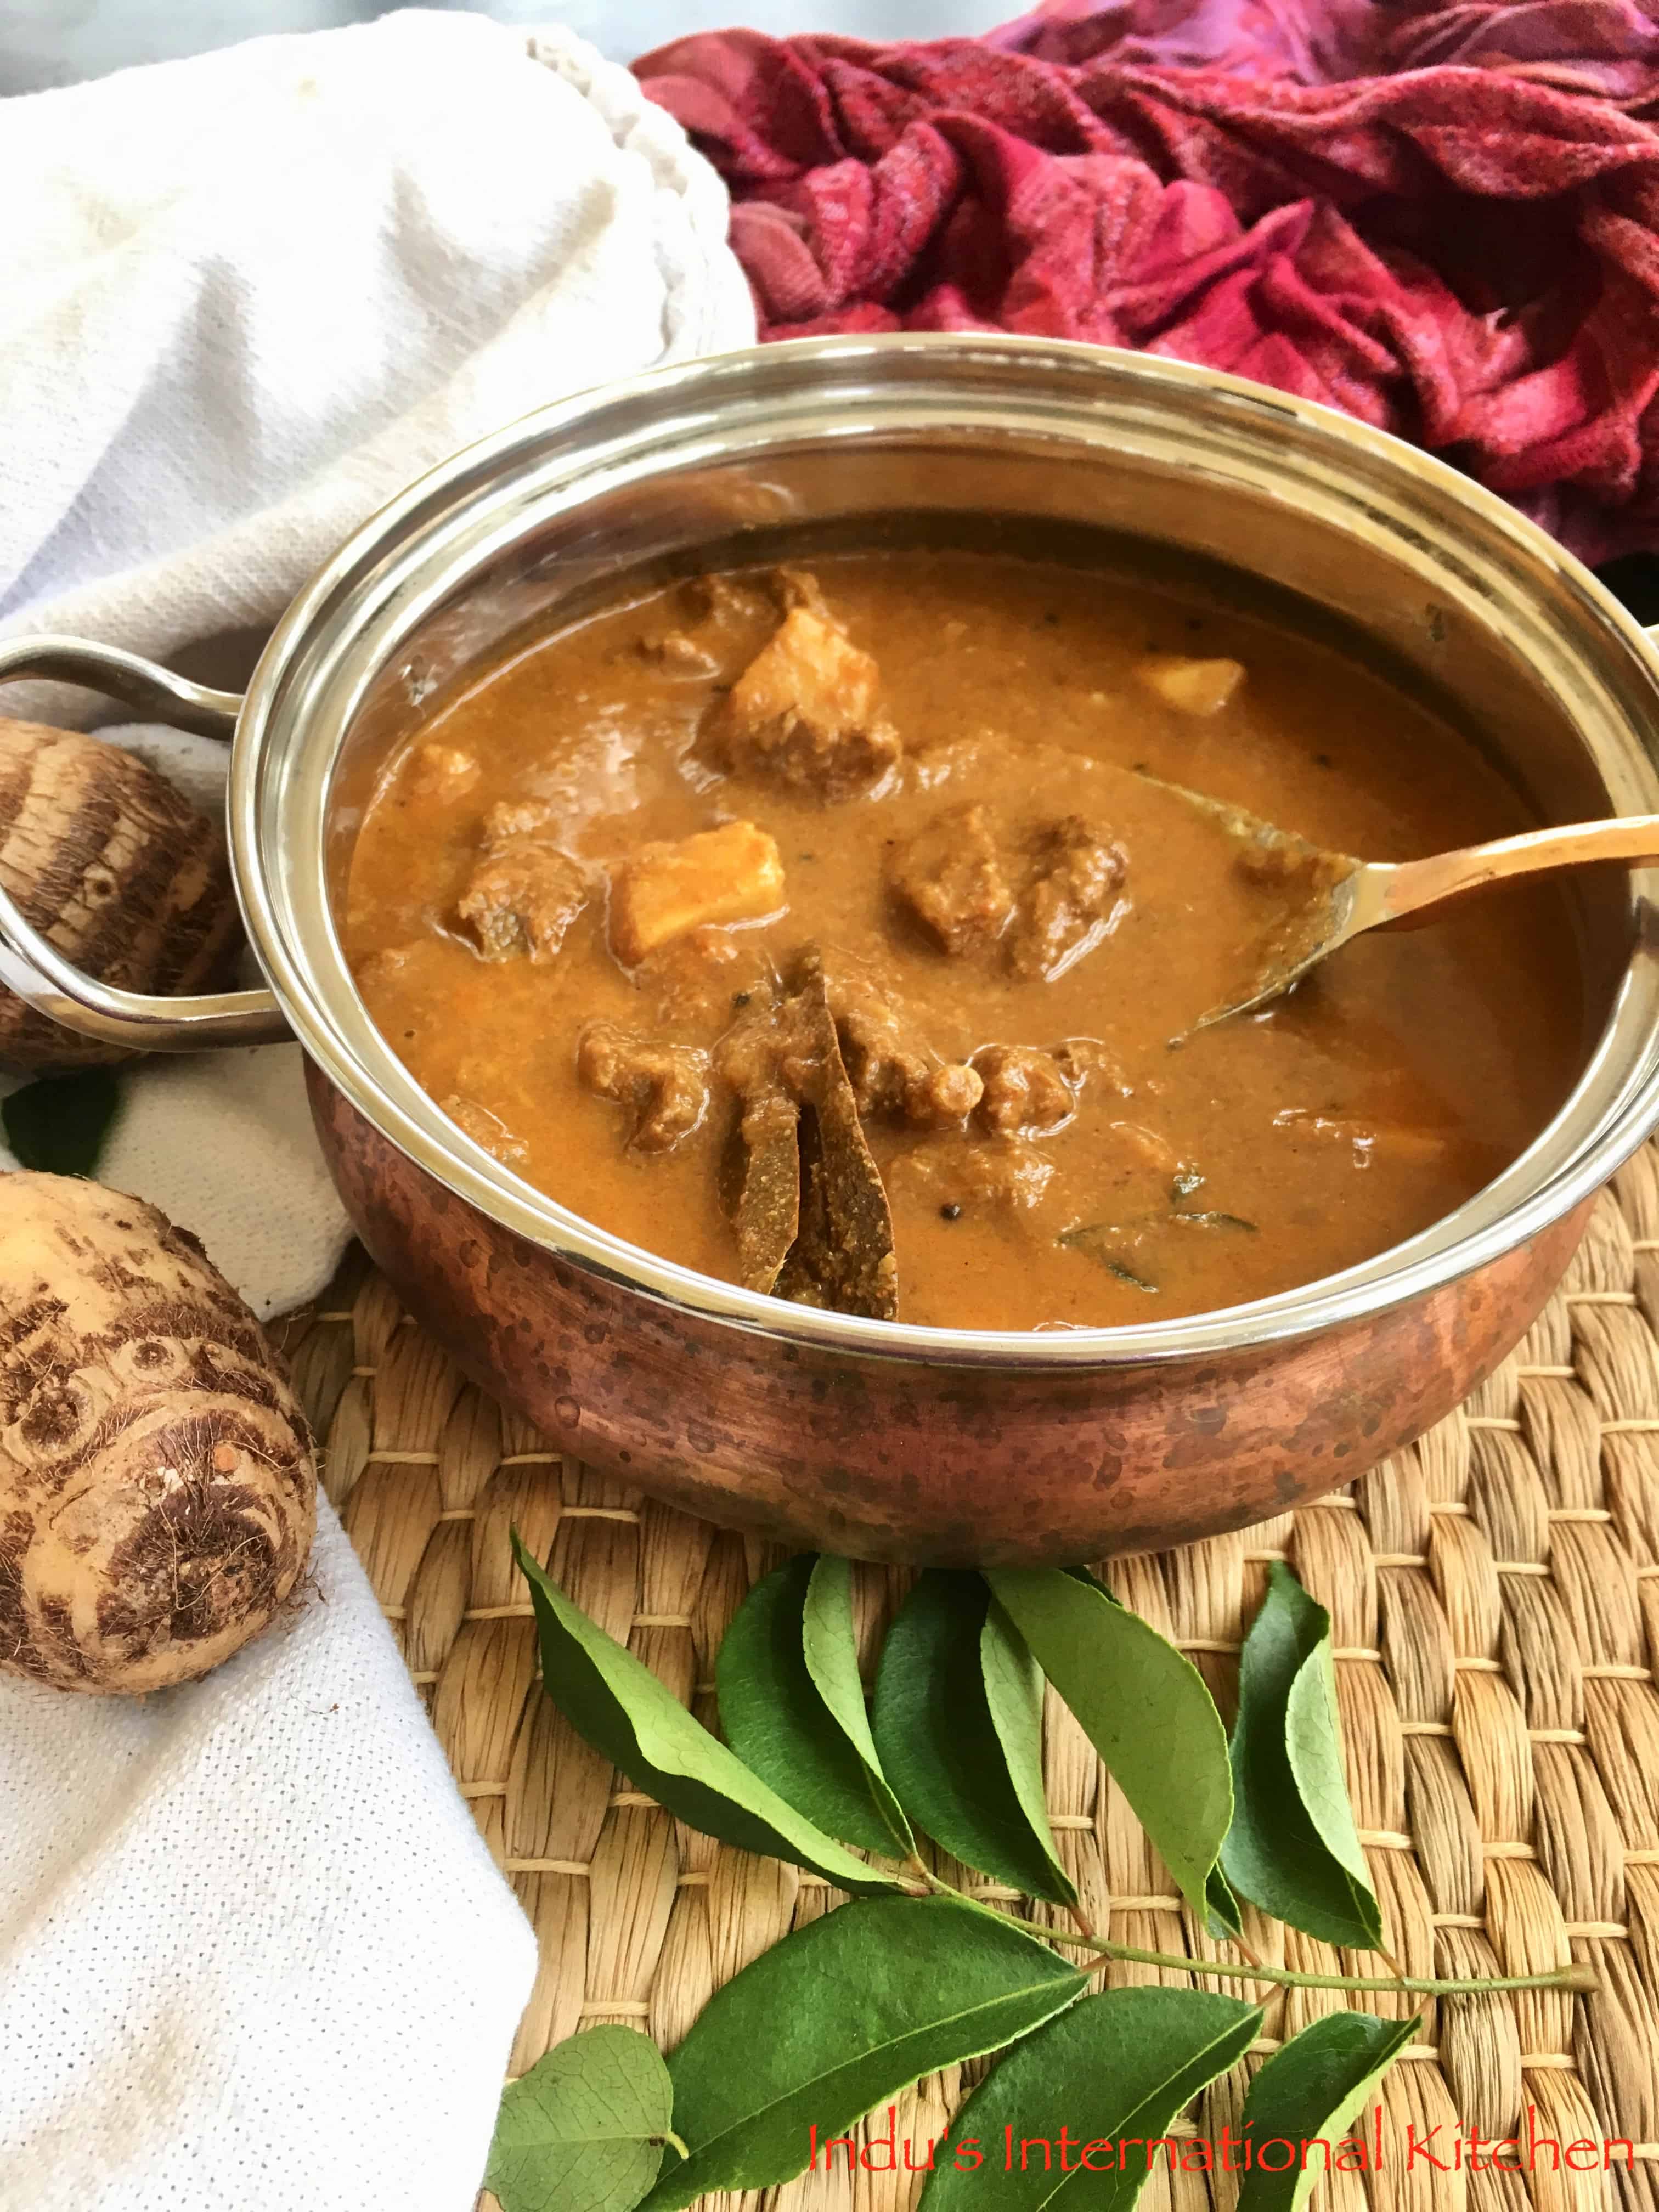 Kerala Beef Curry With Toasted Coconut Indian Beef Stew Varatharacha Beef Curry